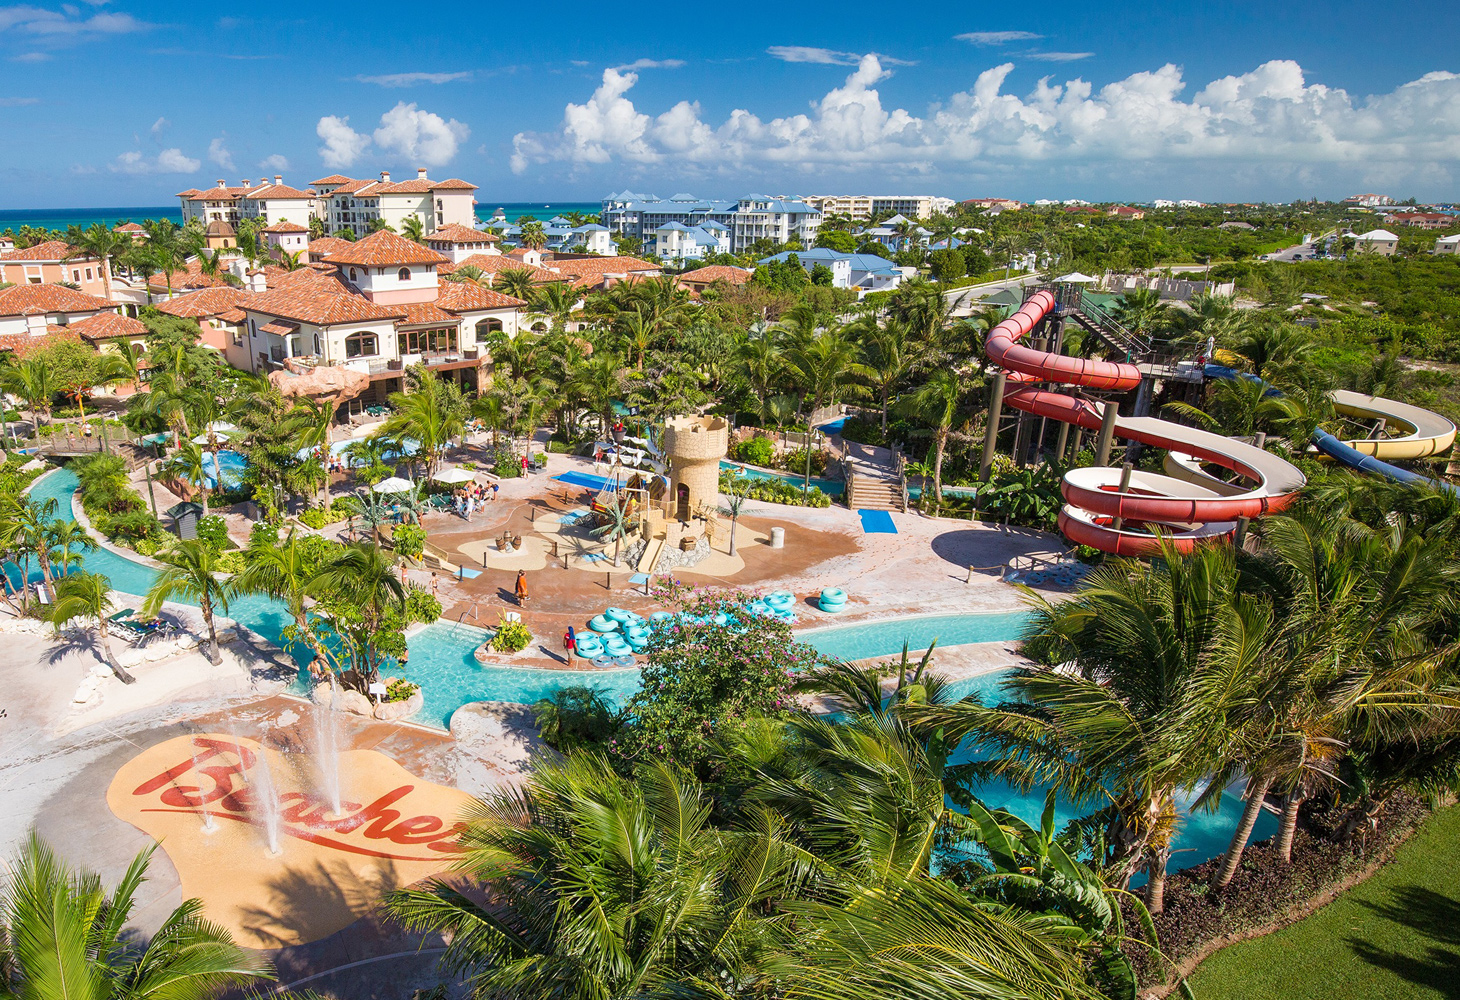 An aerial view of a large resort with pools, a sandcastle style playground, and water slides surrounded by palm trees